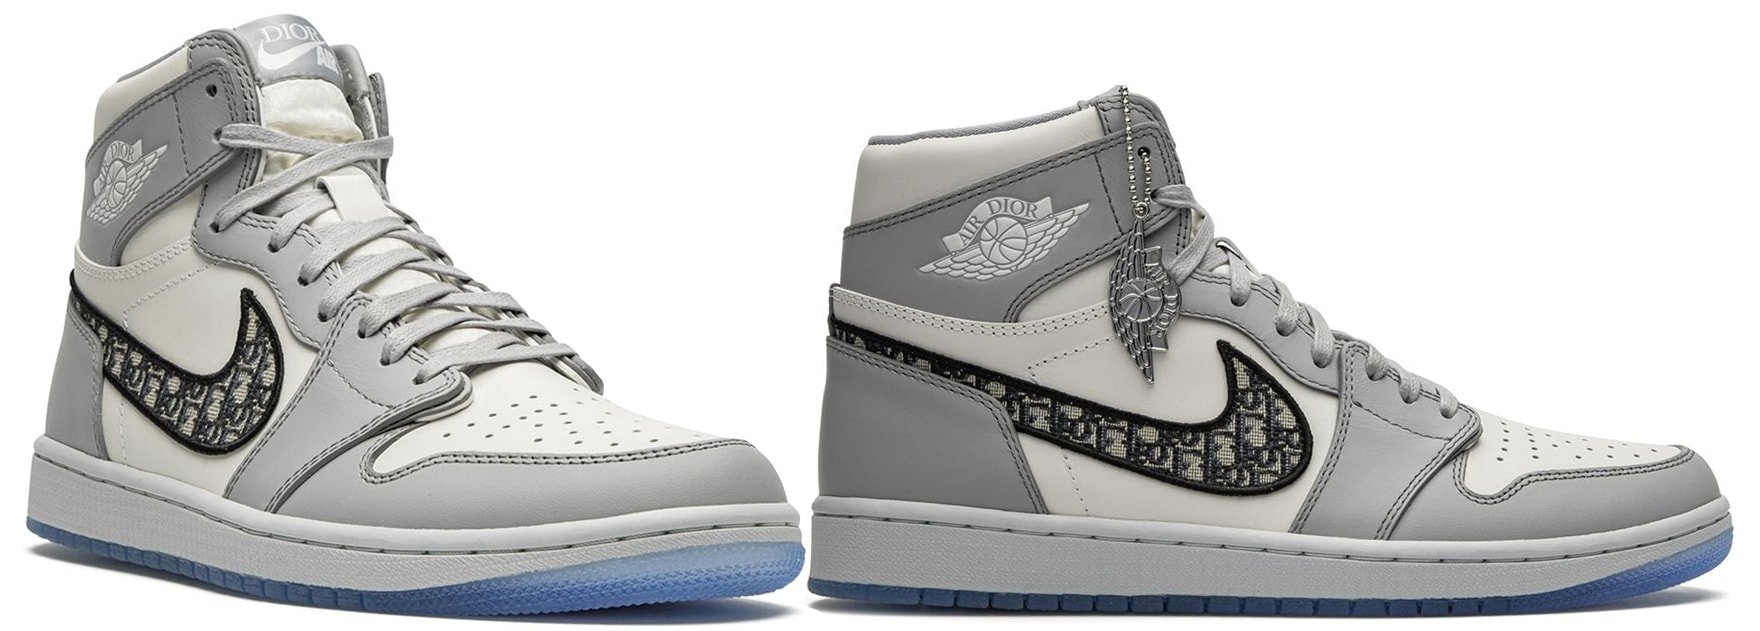 Sneaker giant Nike and French luxury fashion house Dior joined forces to create the luxurious wolf gray/sail white Air Jordan 1s